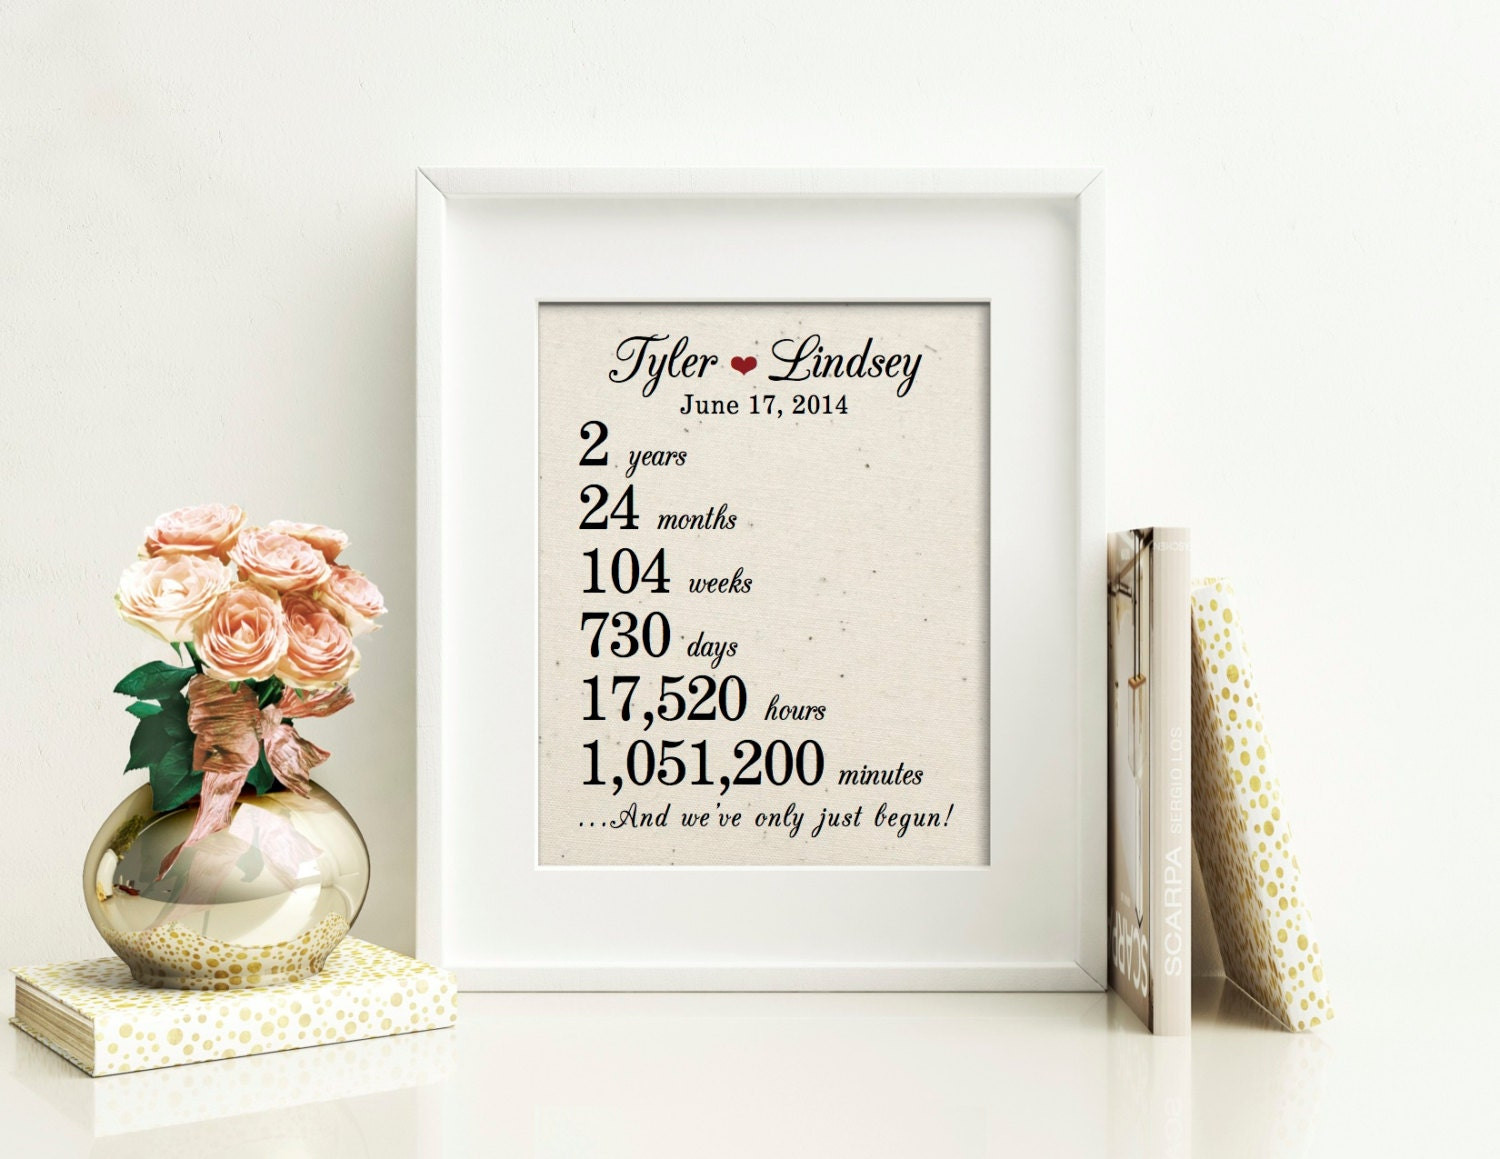 Gift Ideas For Second Wedding Anniversary
 2nd Anniversary Gift Cotton Anniversary Gift for Husband